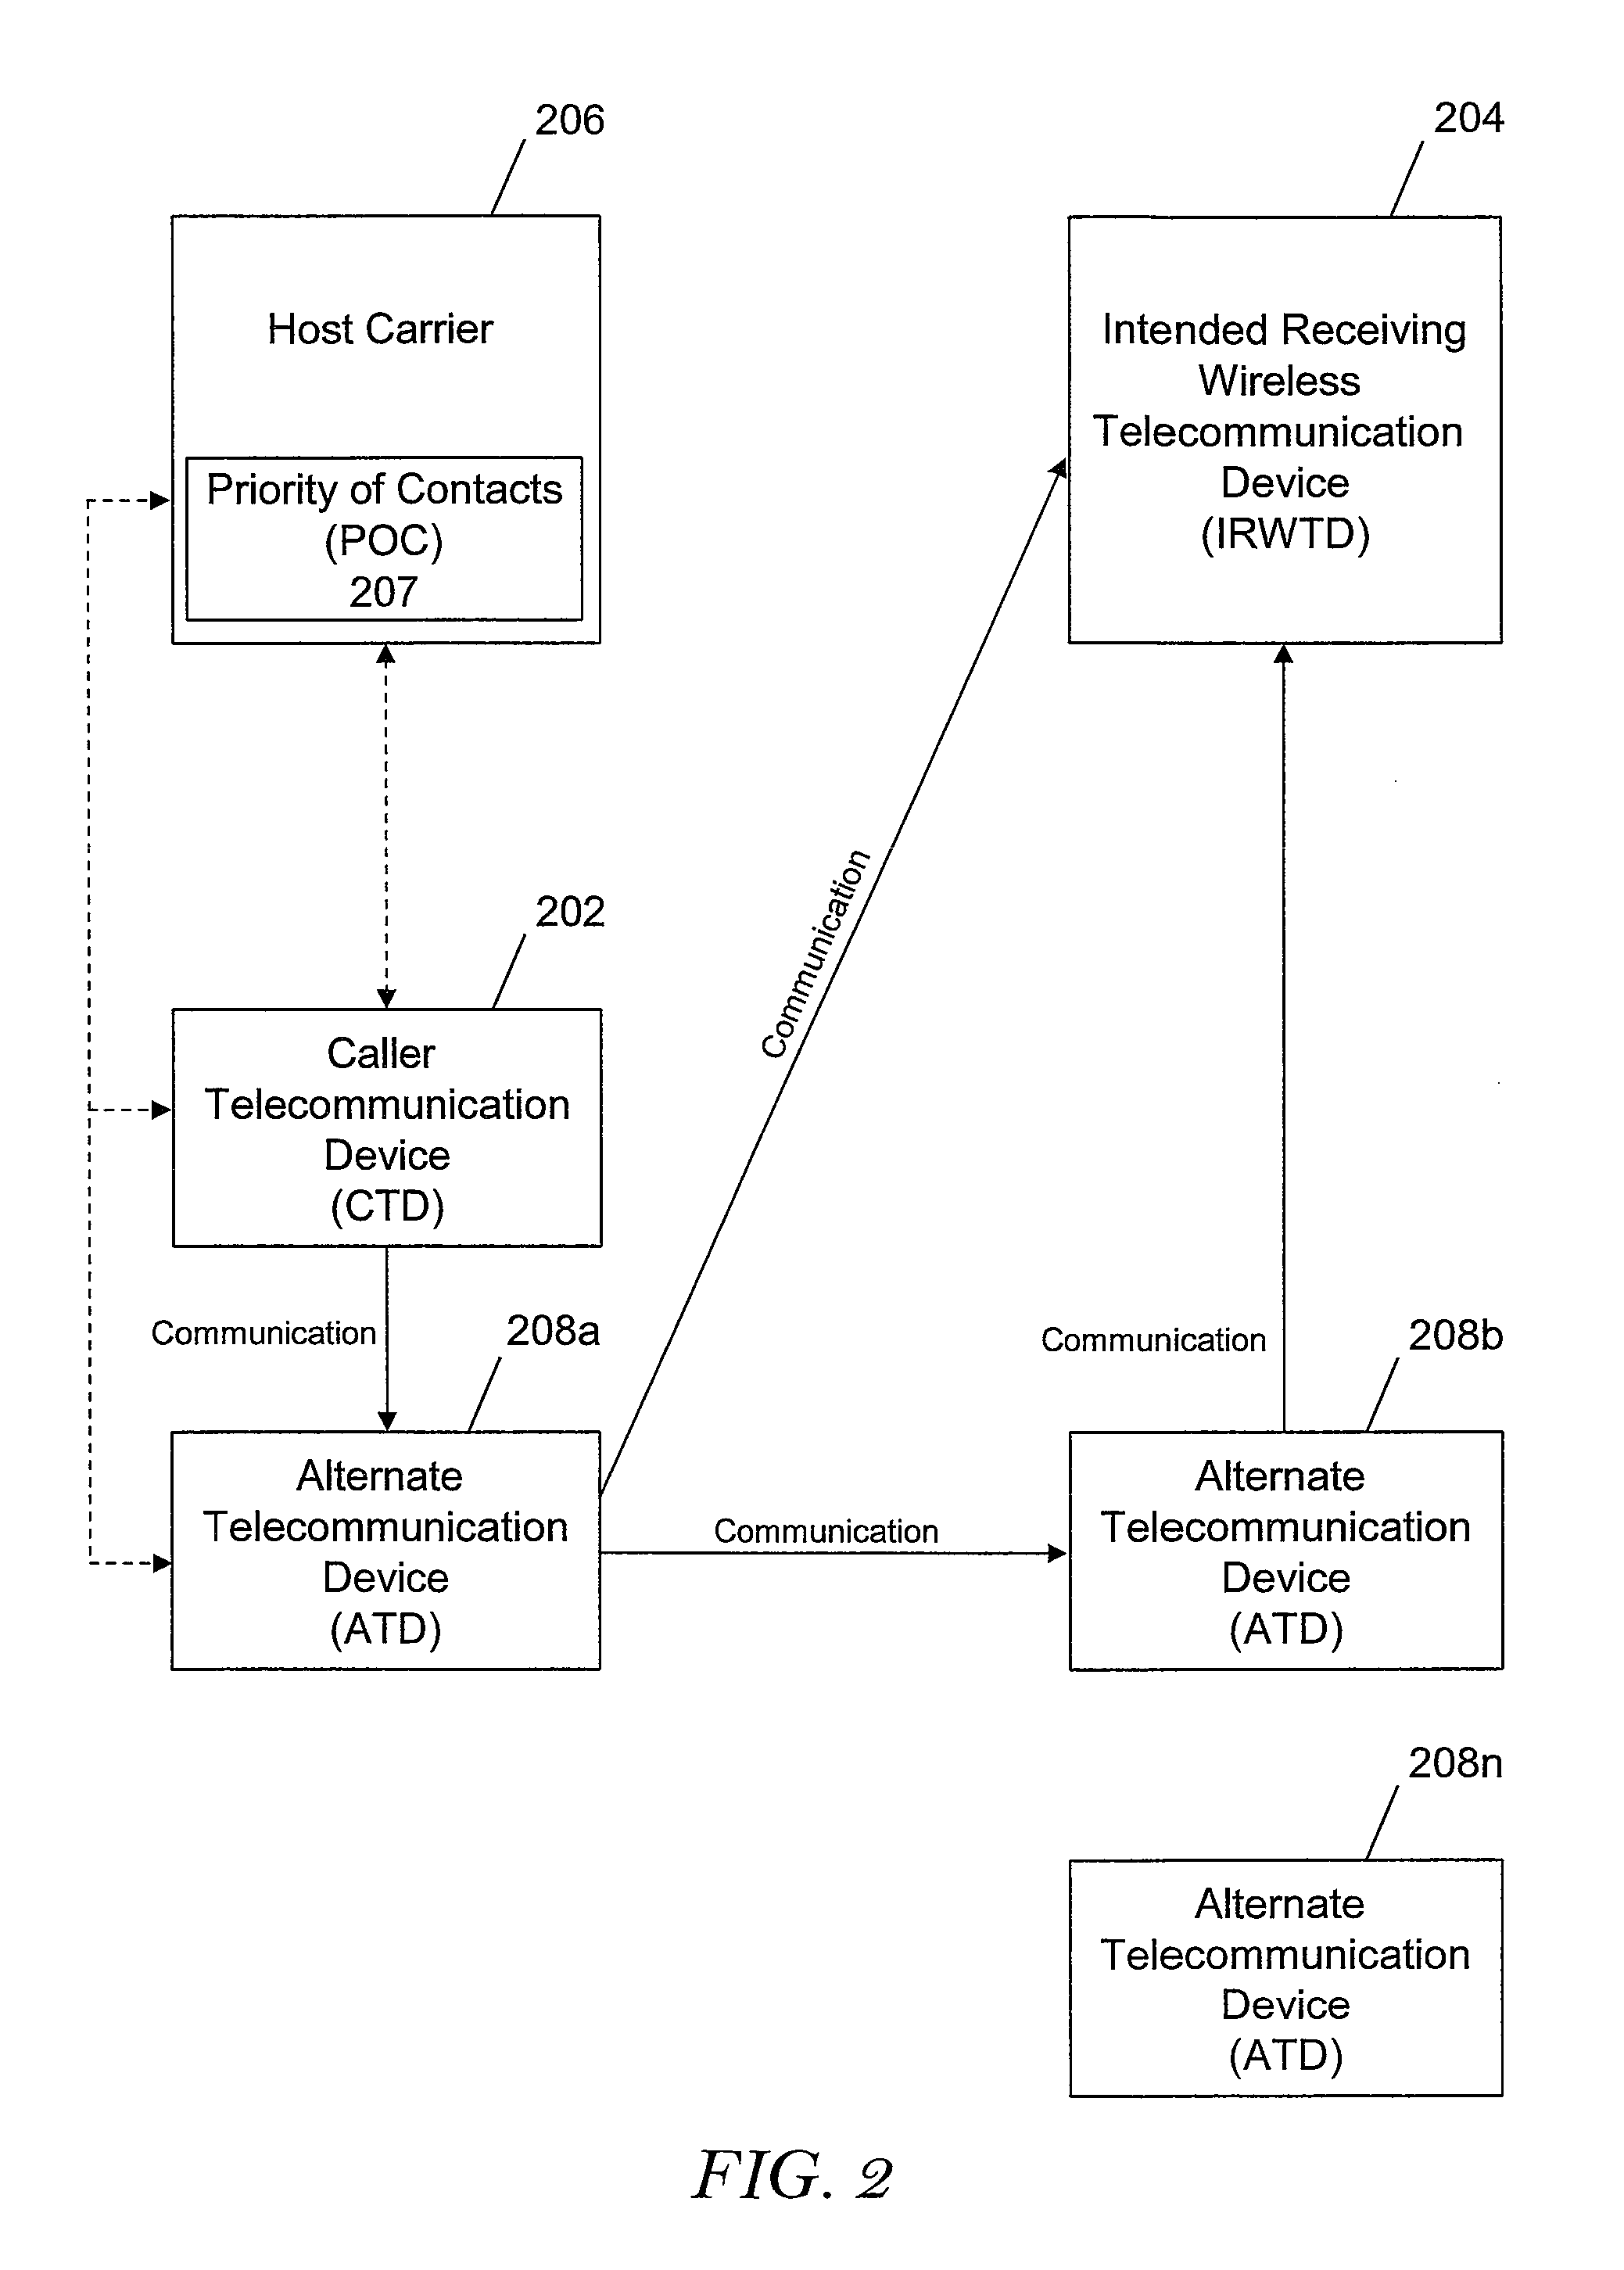 Performing routing of a phone call through a third party device